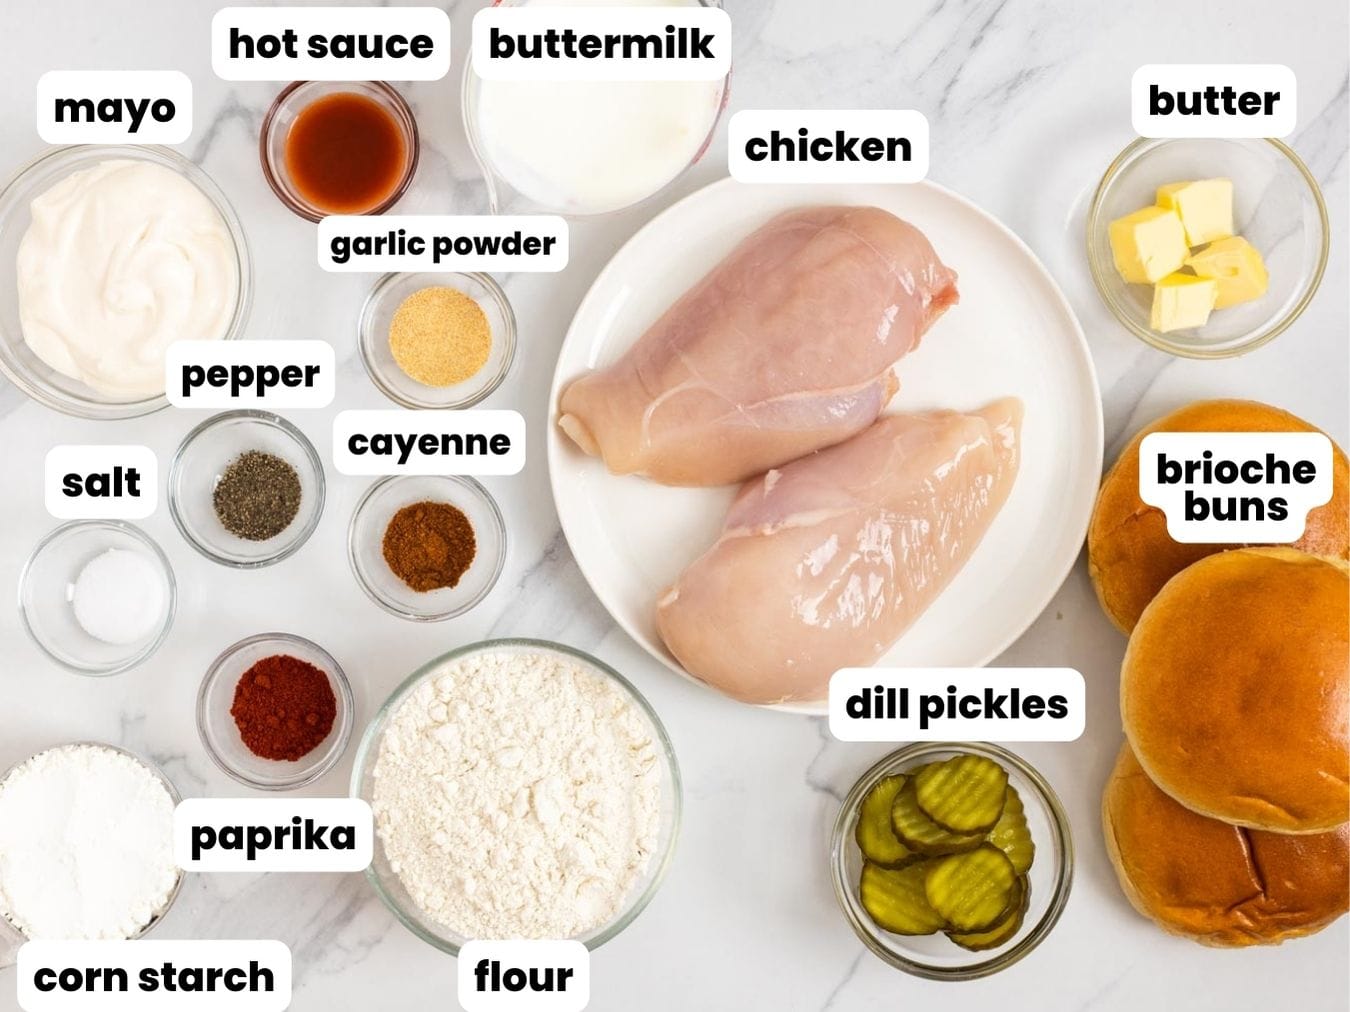 Ingredients needed to make crispy popeye's chicken sandwiches including chicken, flour, cornstarch, brioche buns, butter, mayo, hot sauce, pickles, and seasonings.